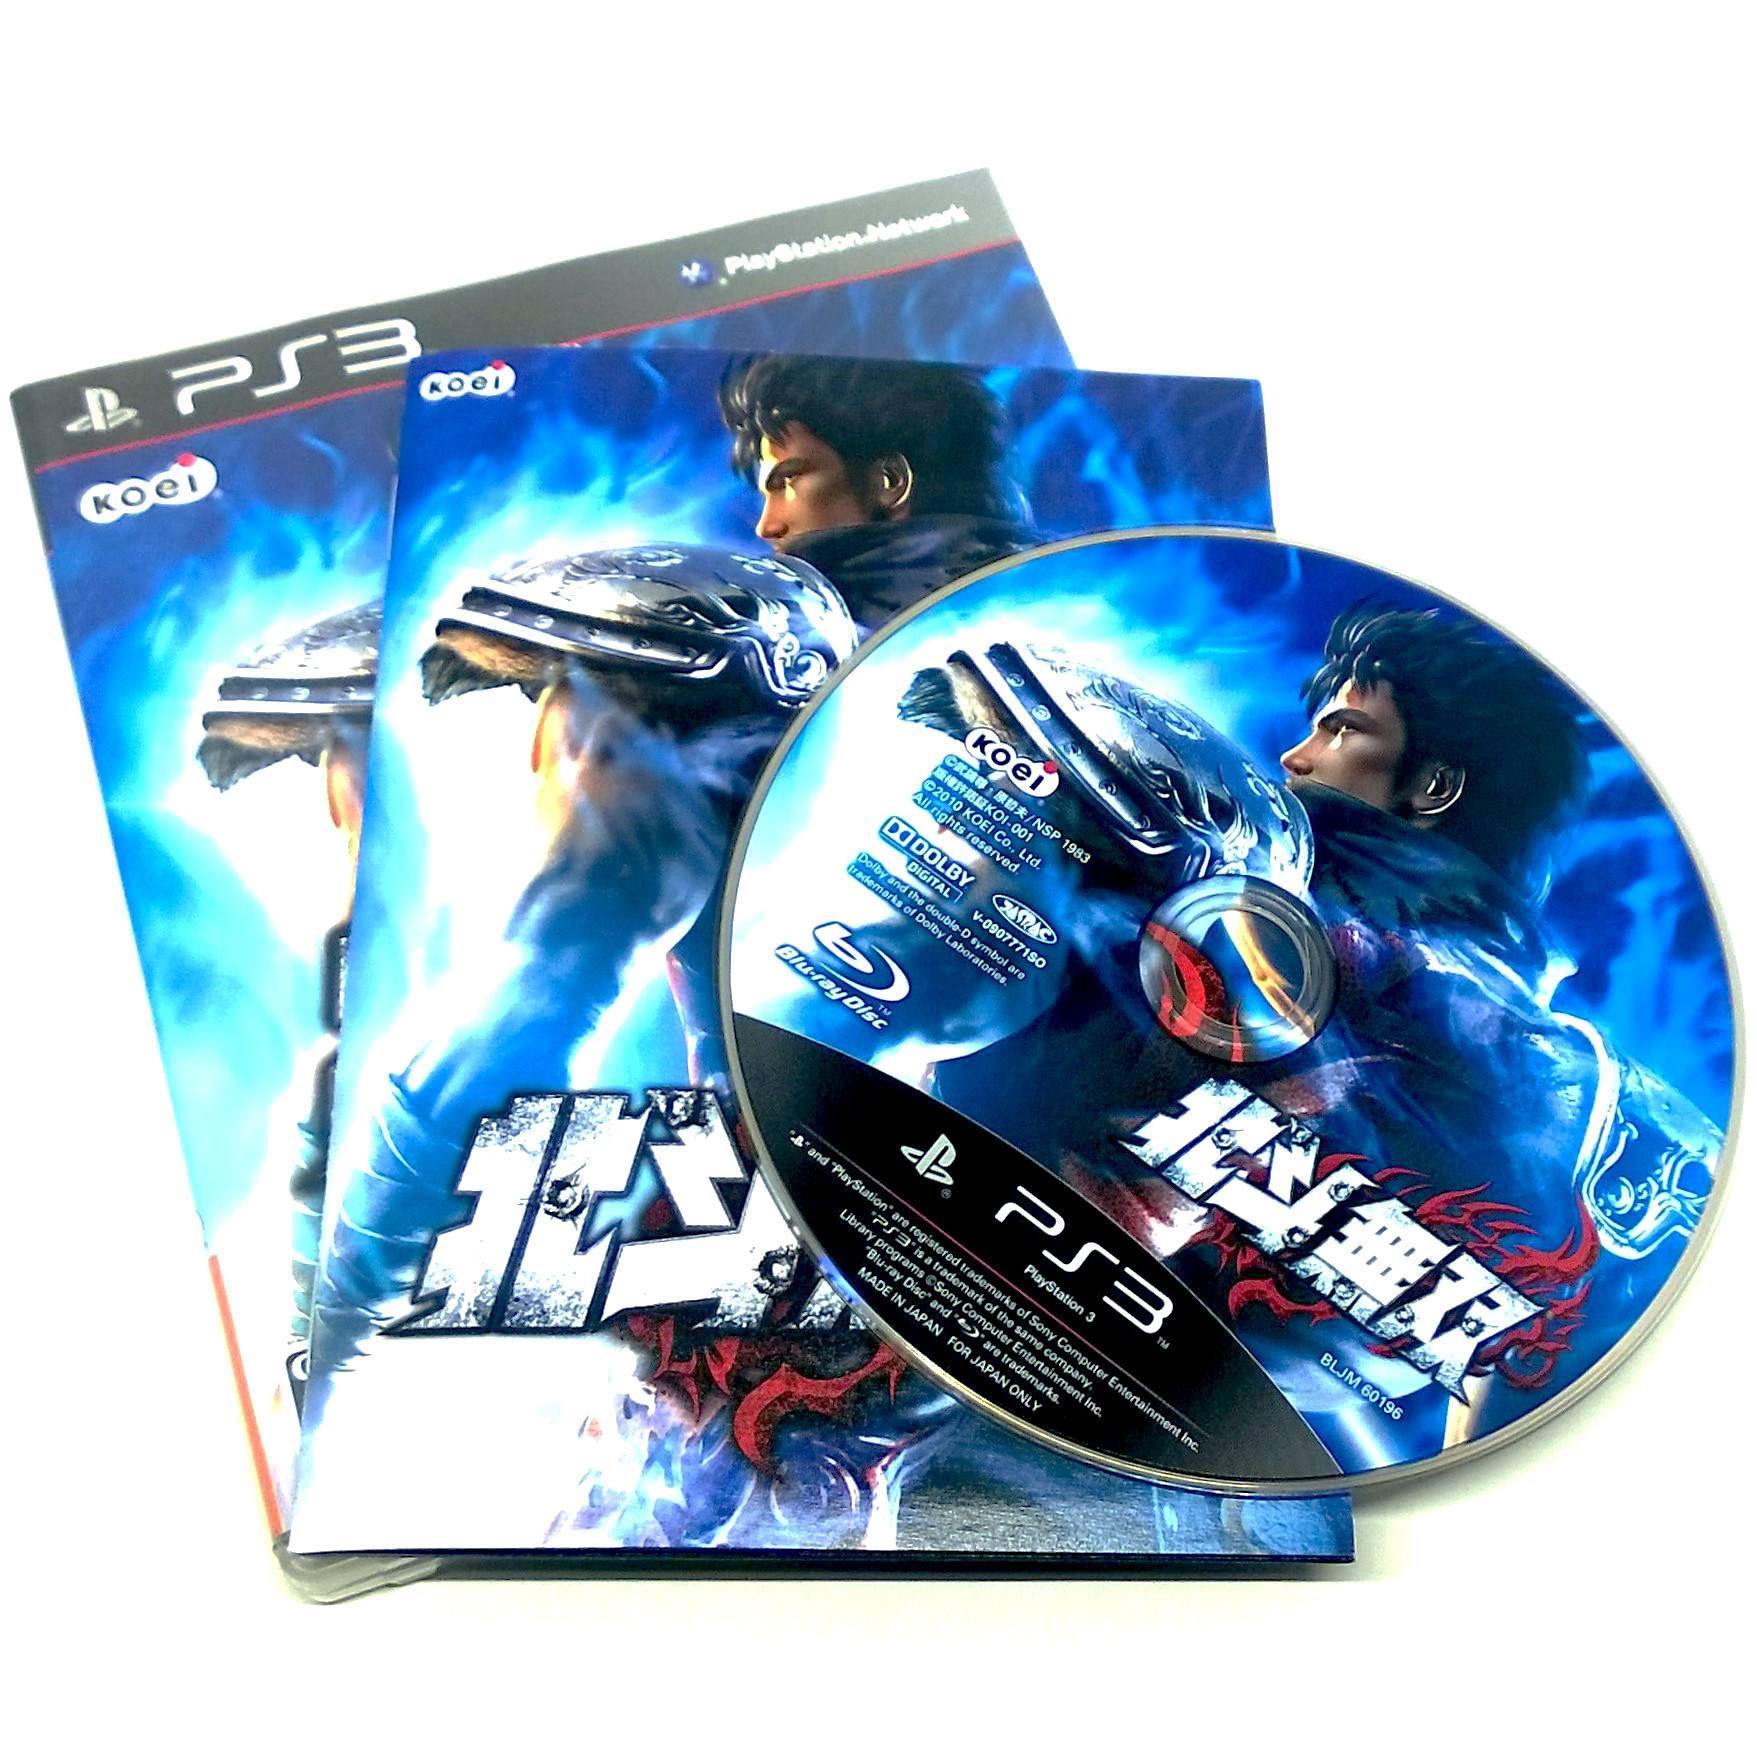 Hokuto Musou for PlayStation 3 (import)